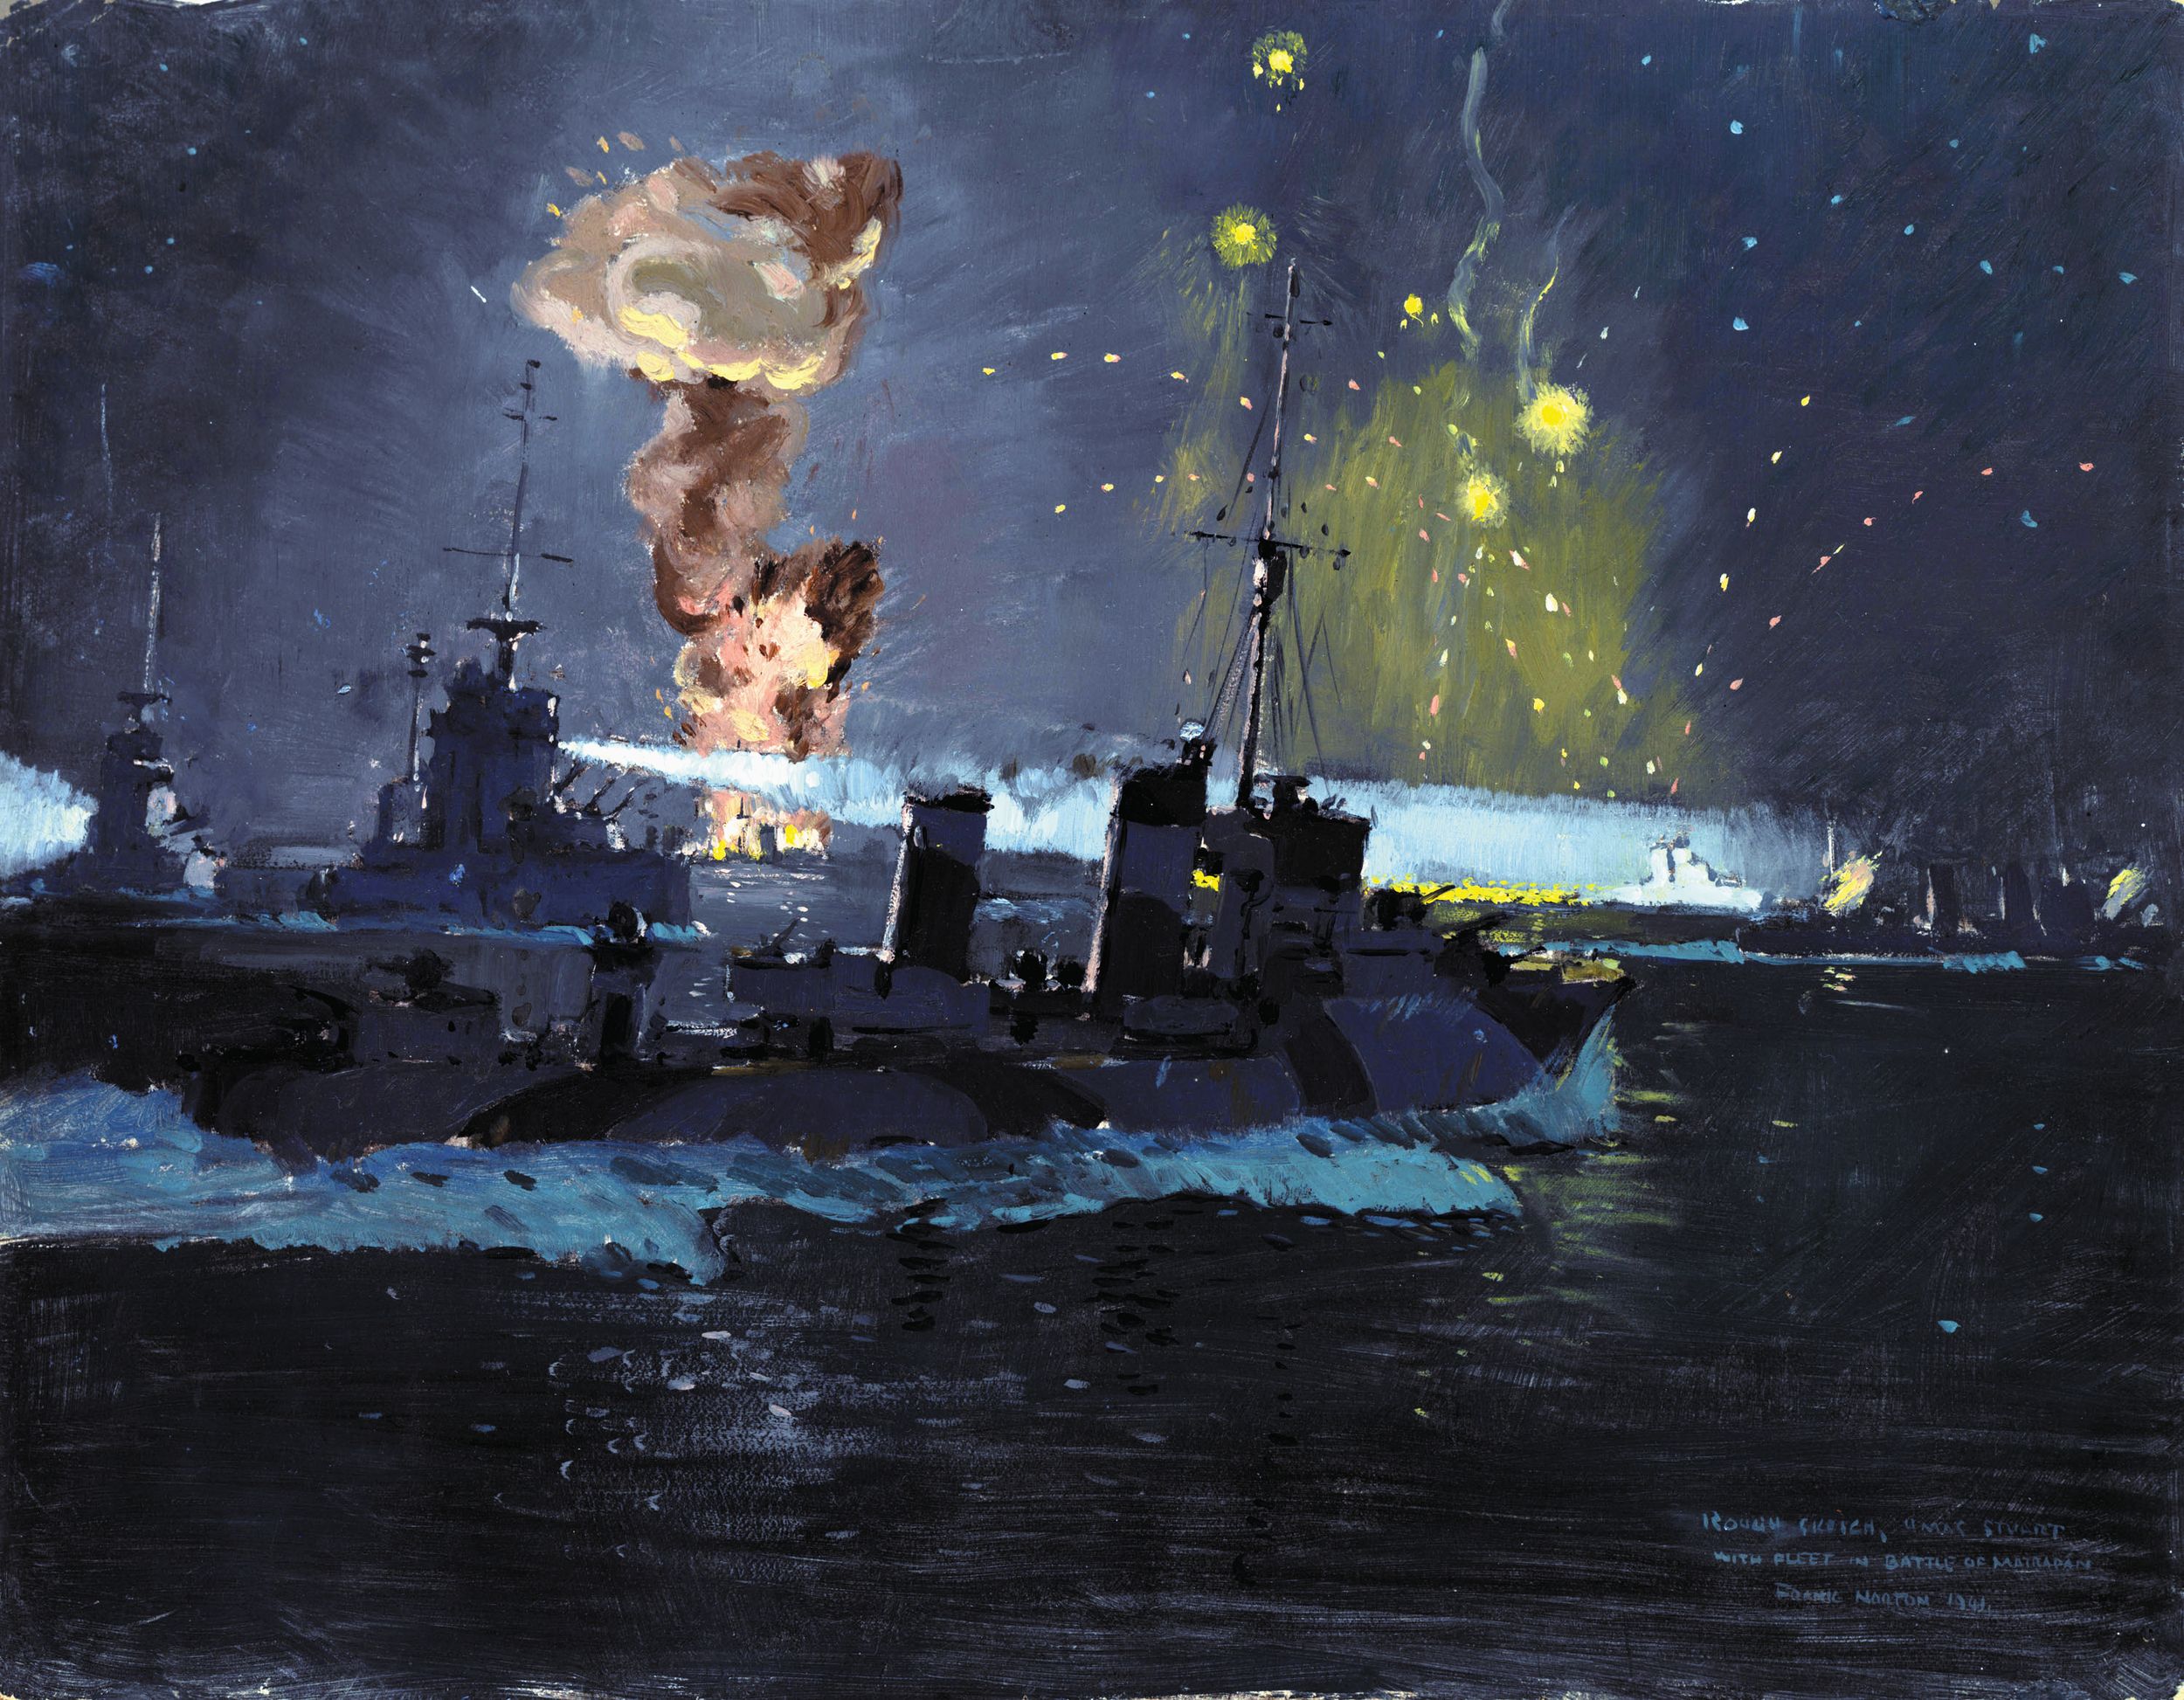 Artist Frank Norton painted this nighttime scene of the Battle of Matapan. HMAS Stuart is in the foreground, HMS Havock at left, and two Italian Zara-class destroyers in the background. Radar gave the British the advantage during night action.